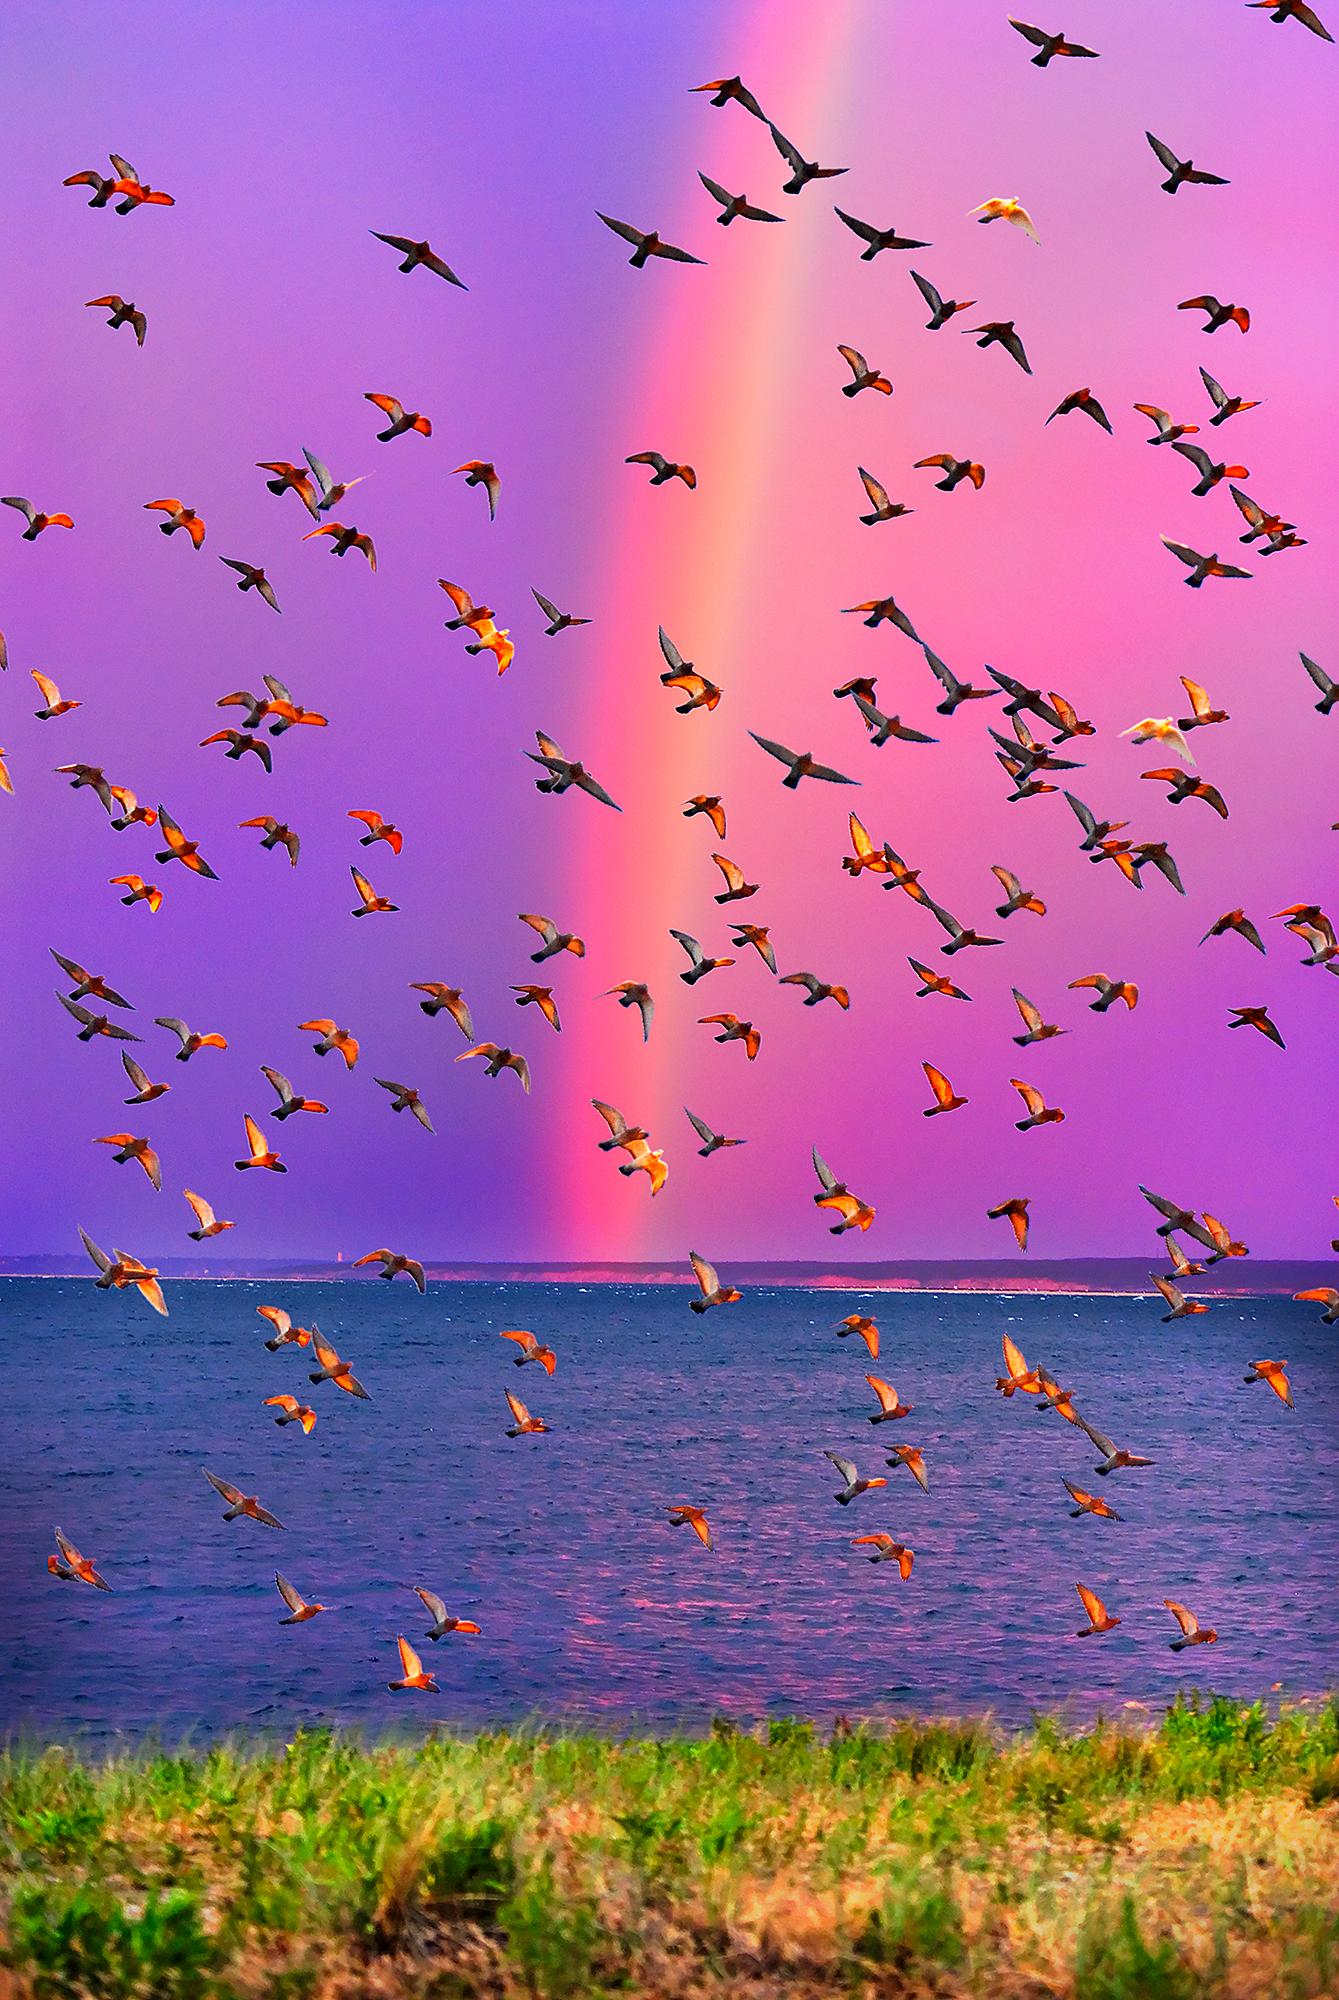 Mitchell Funk Abstract Photograph - Rainbow in East Hampton with a Celebrating Flock of Birds  - Magenta Sky